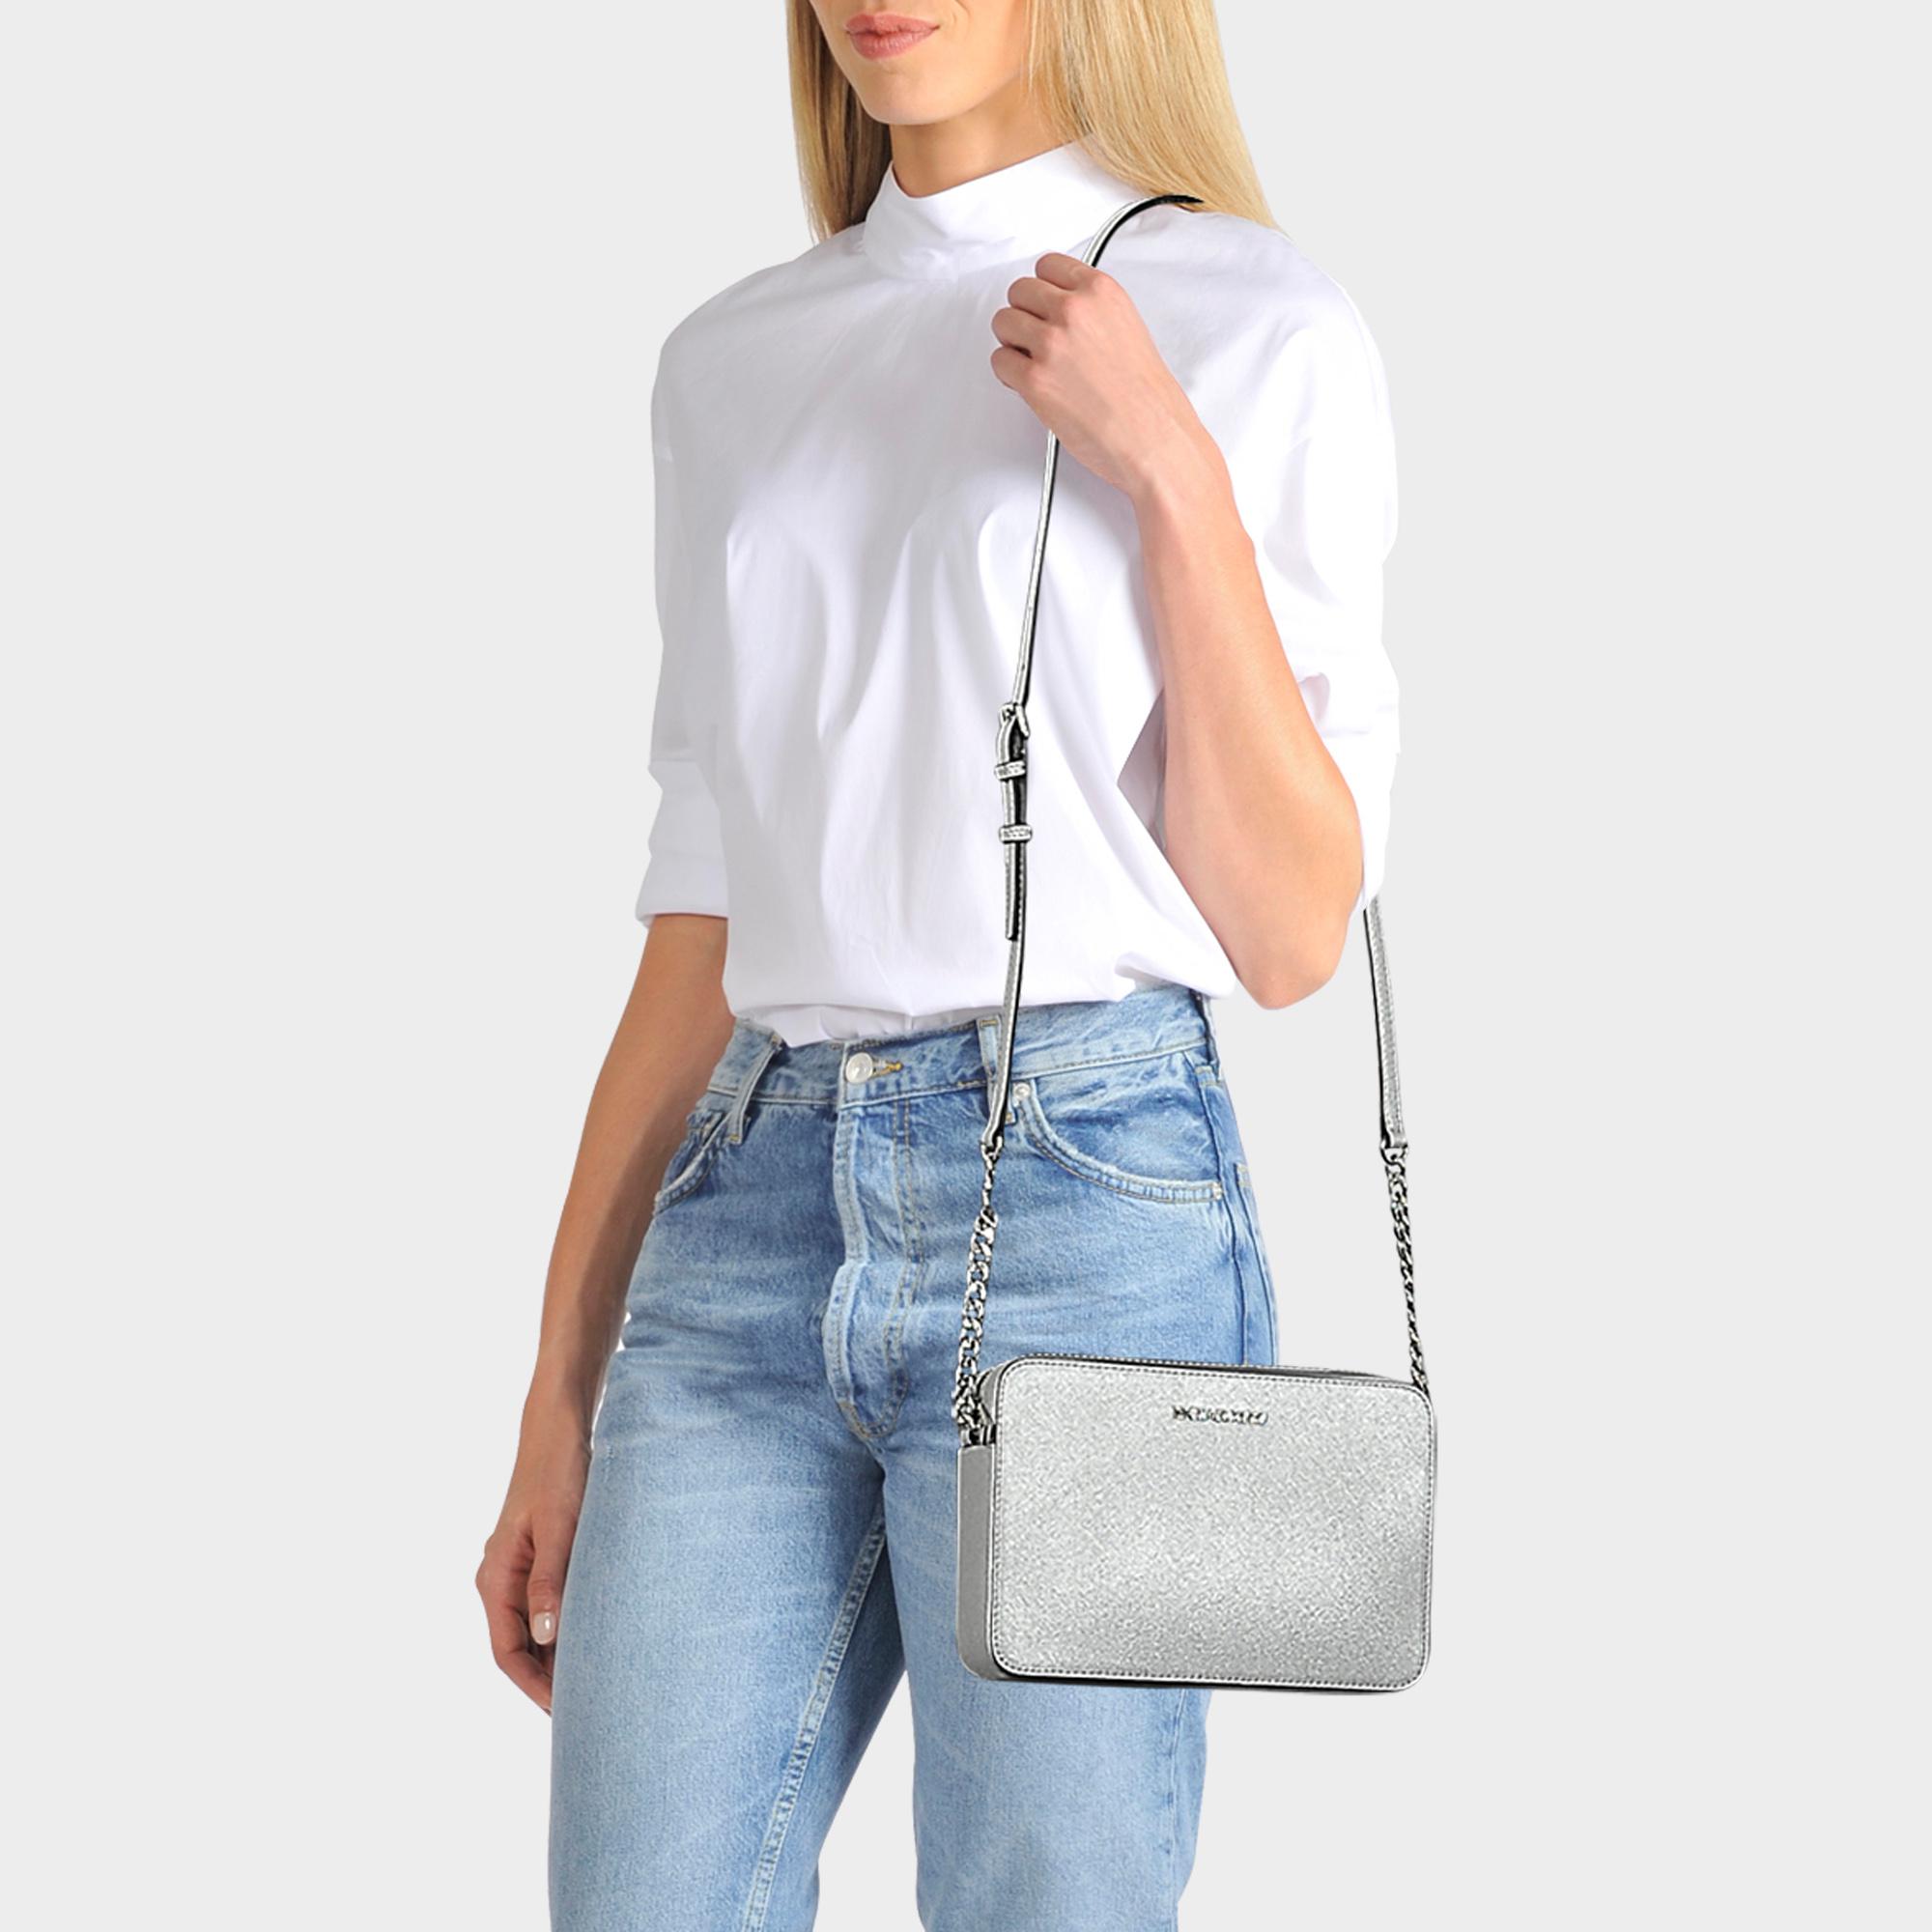 MICHAEL Michael Kors Large East-west Crossbody Bag In Silver Metallic Saffiano Leather in Gray ...